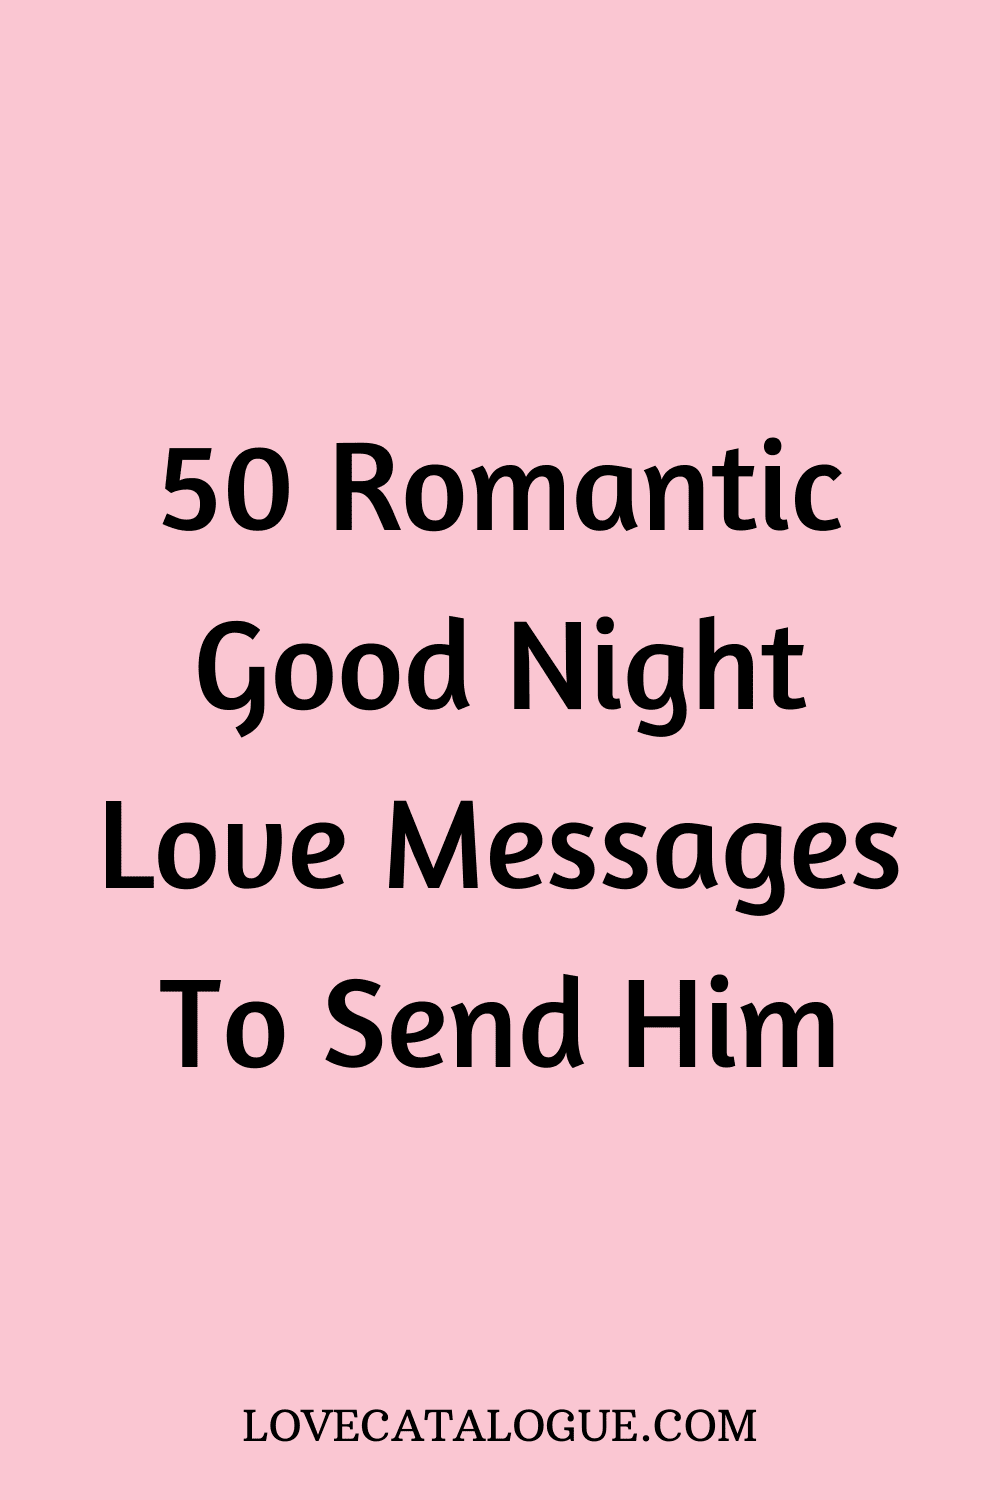 50 Romantic Good Night Love Messages To Send Him